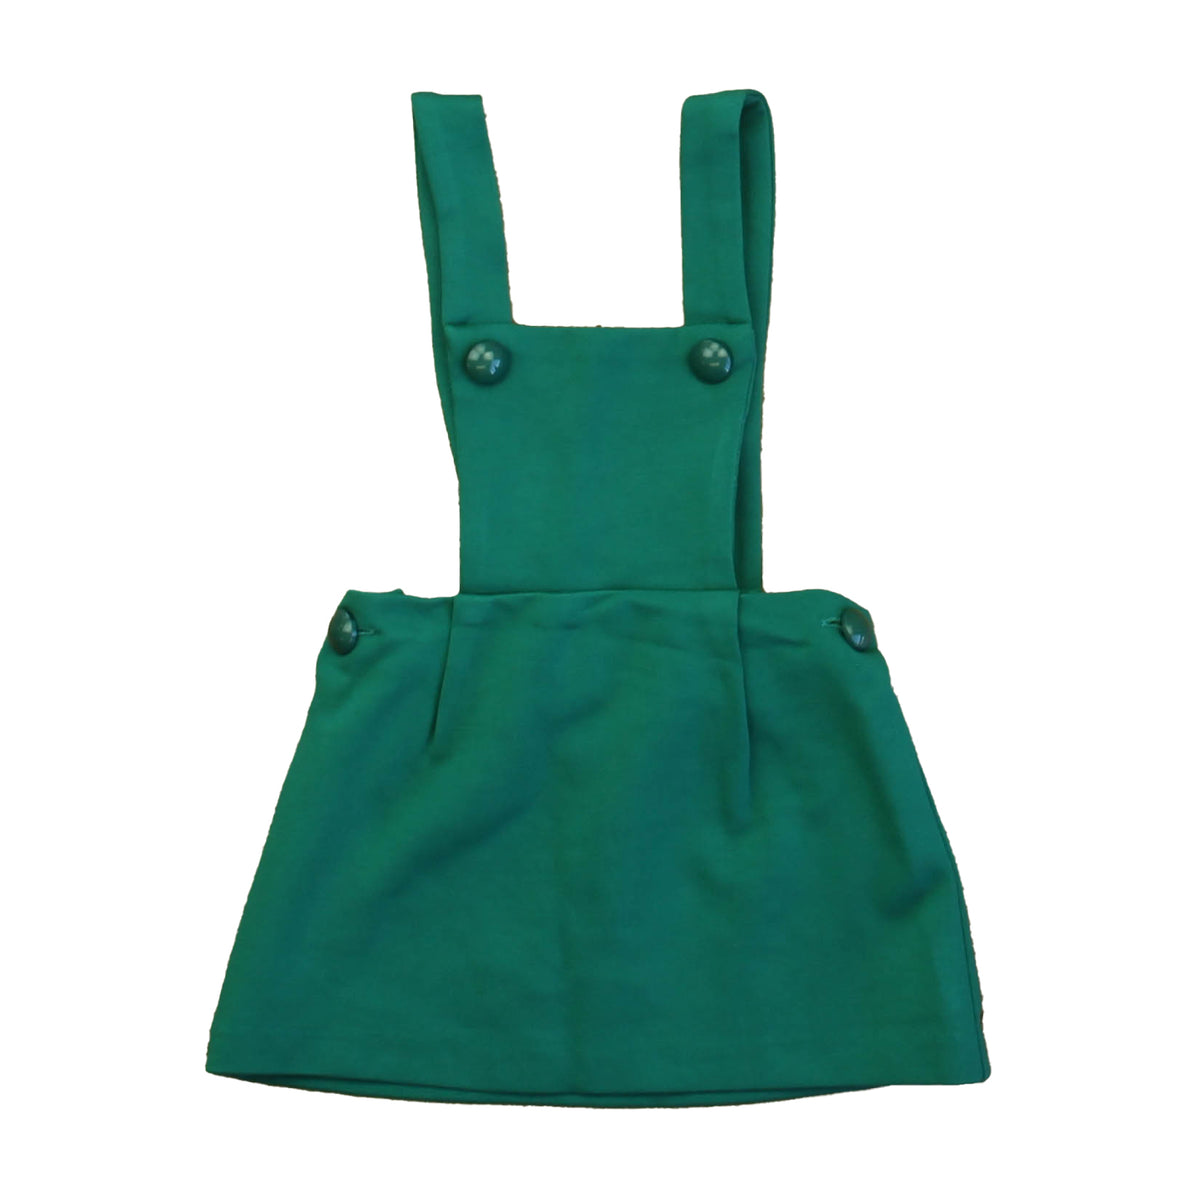 New with Tags: Cadium Green Dress size: 9-12 Months -- FINAL SALE